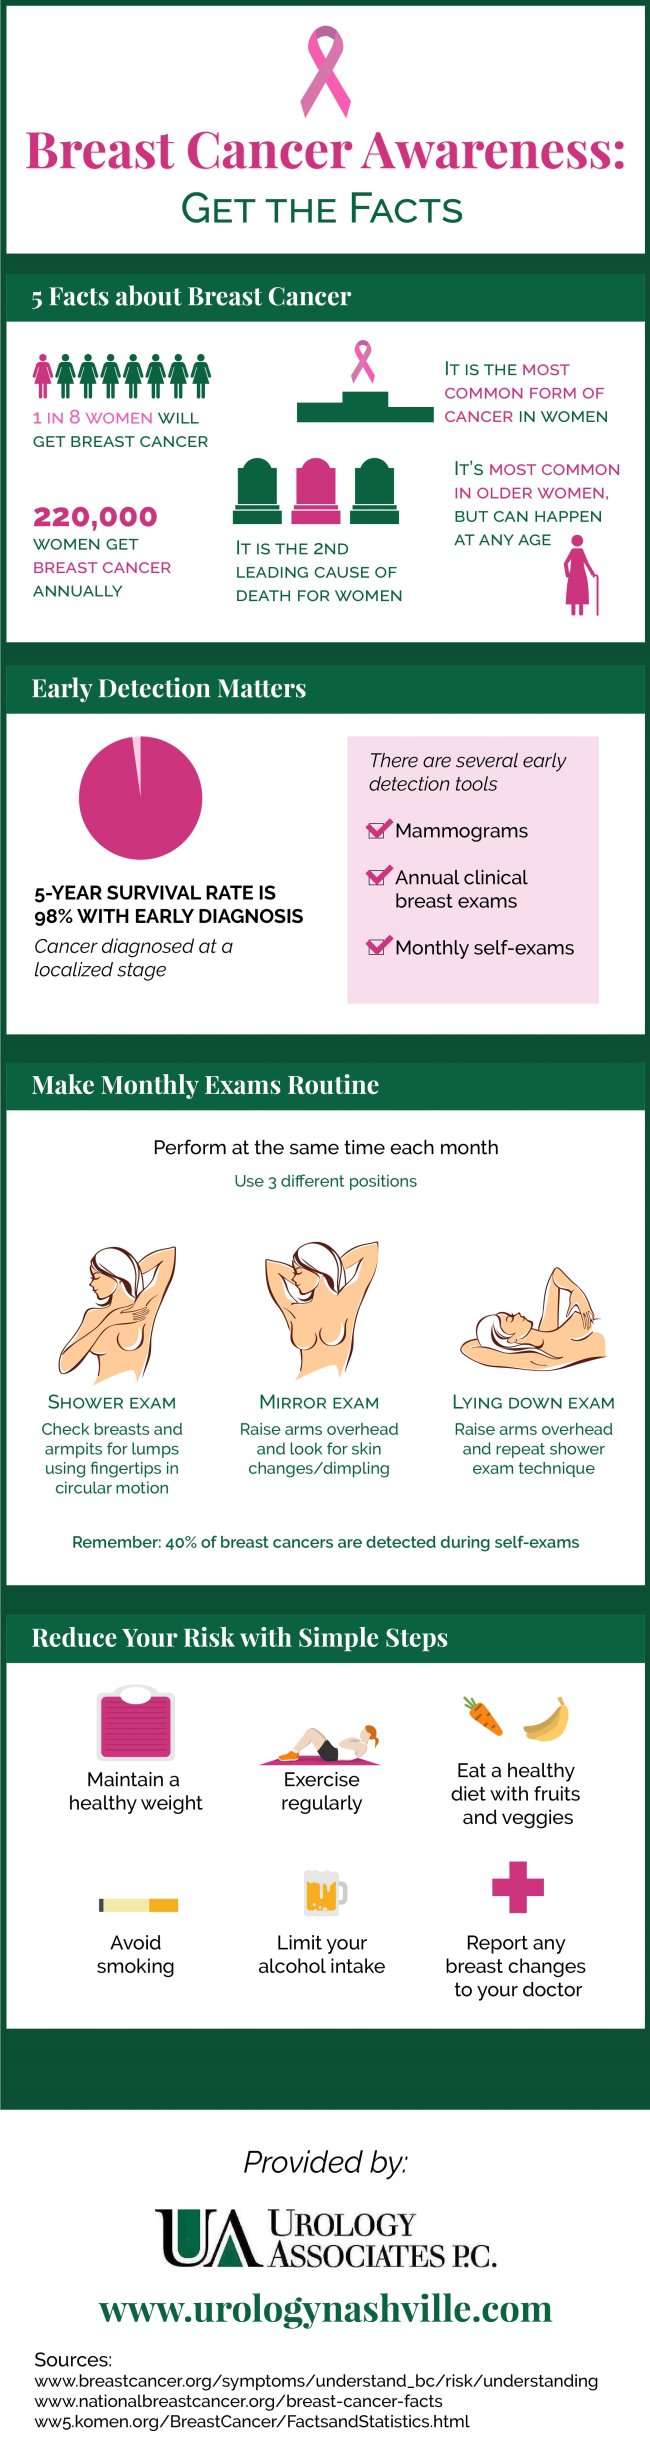 Breast Cancer Awareness: Get the Facts [Infographic]